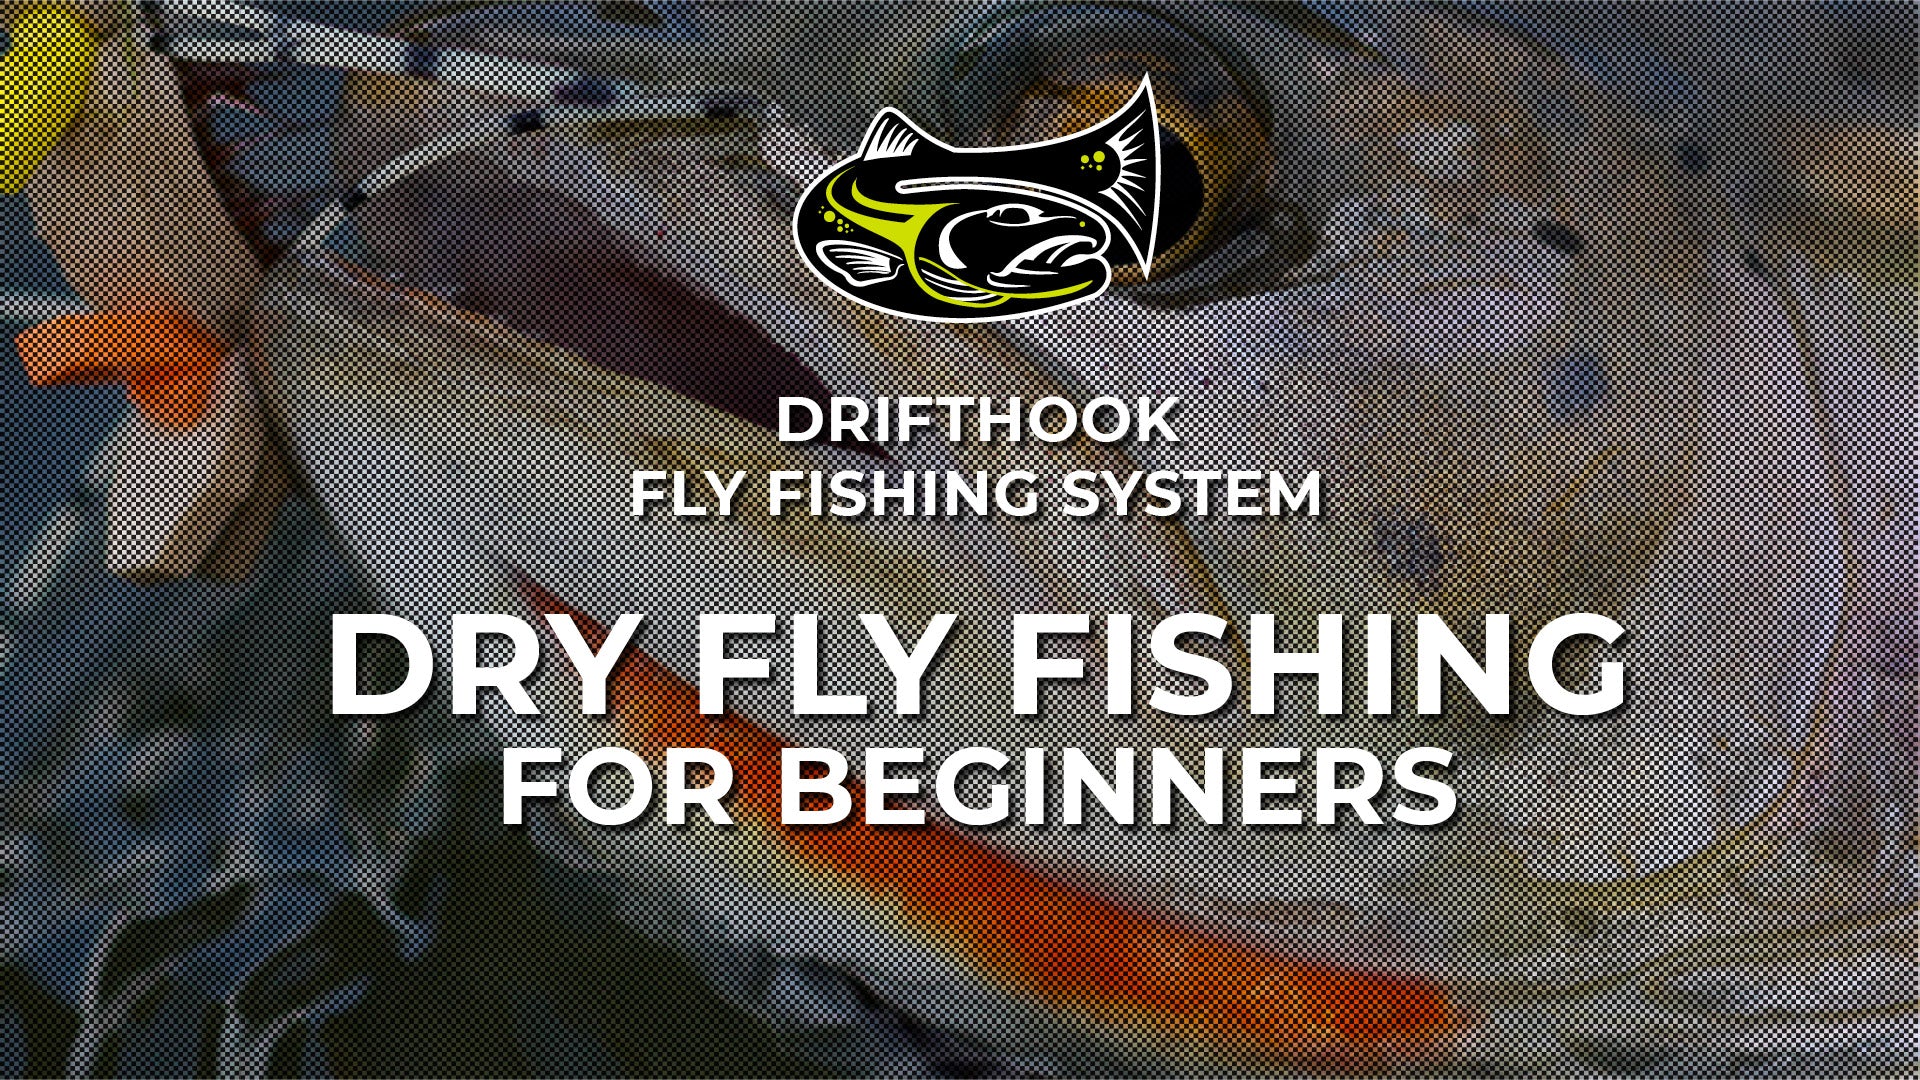 Dry Fly Fishing for Beginners